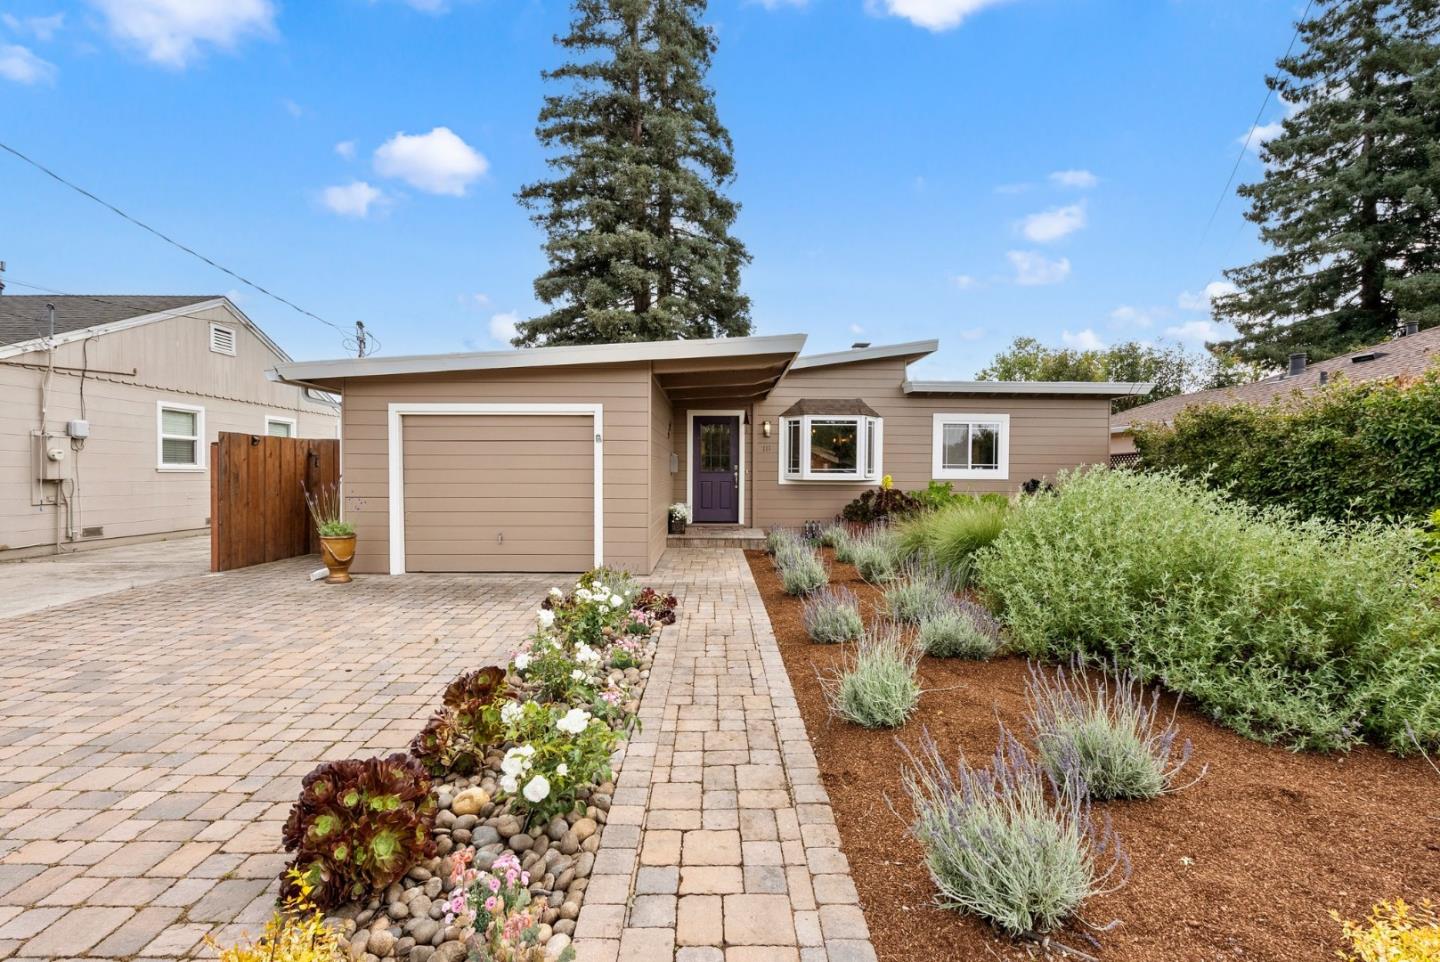 Photo of 111 Dalma Dr in Mountain View, CA